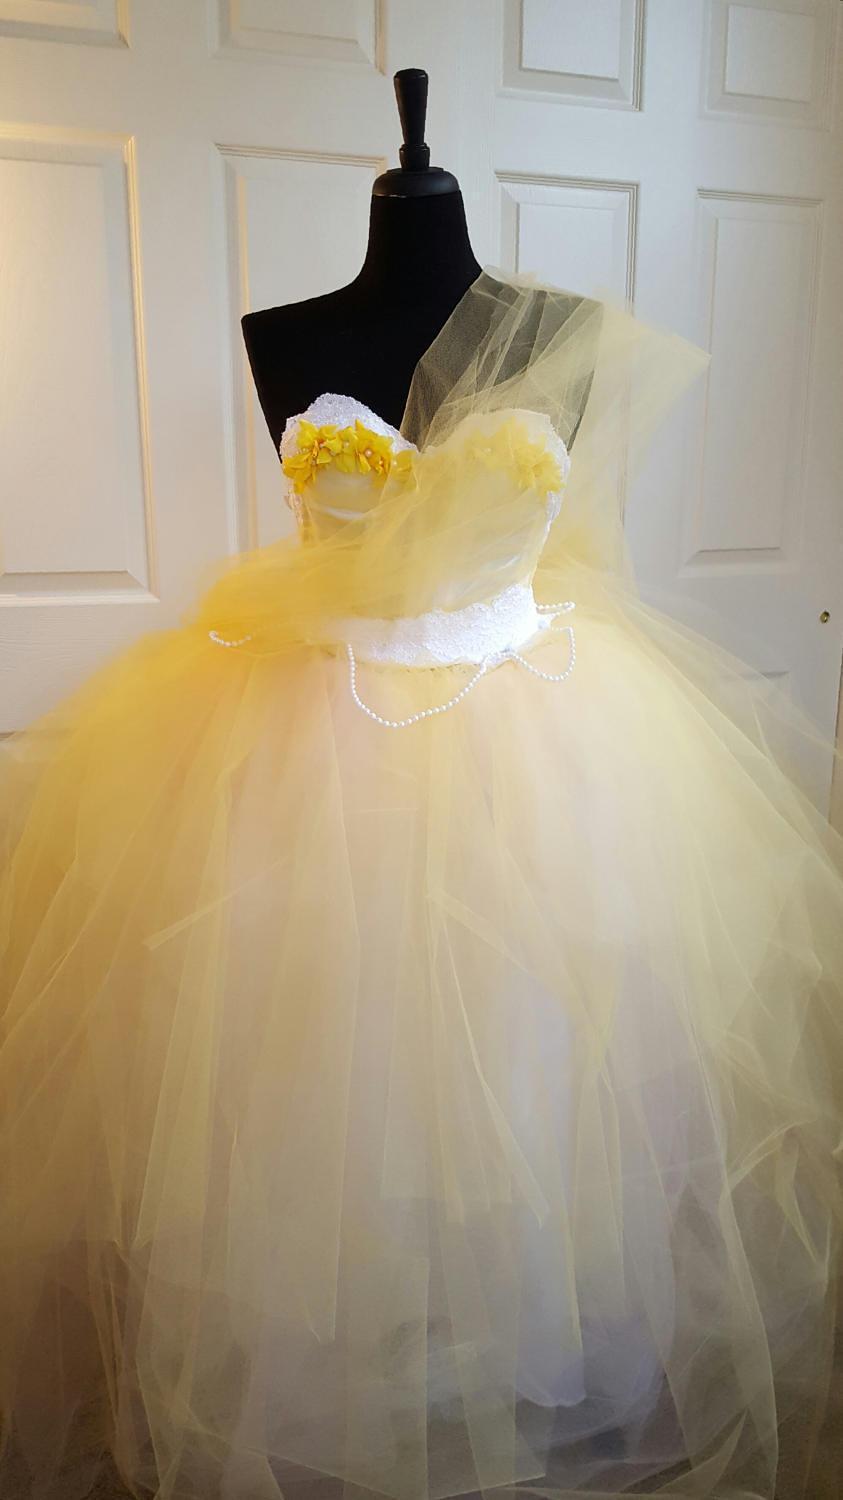 Wedding - Sample Gown / Yellow And White Lace Tulle Corset Lehenga Saree Sari Bridal Wedding Ball Gown Party Costume Quinceanera Prom